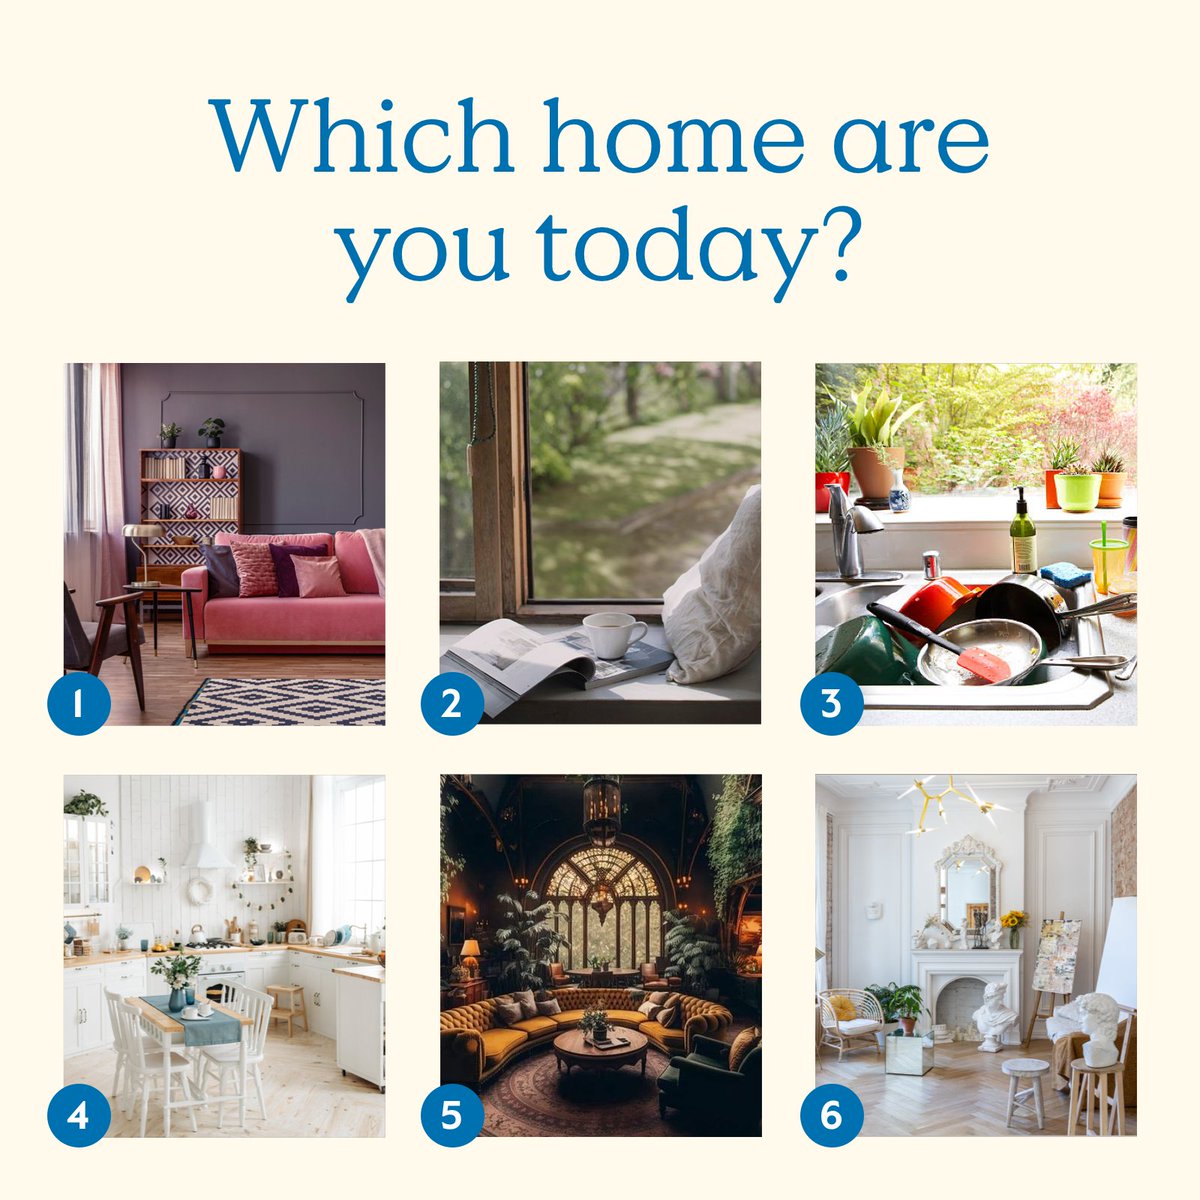 Which home matches your mood today? Share which one you're feeling in the comments. . . . . . #GroveCollaborative #GroveHome #InteriorDesign #HomeDecor #KitchenDecor #LivingRoomDesign